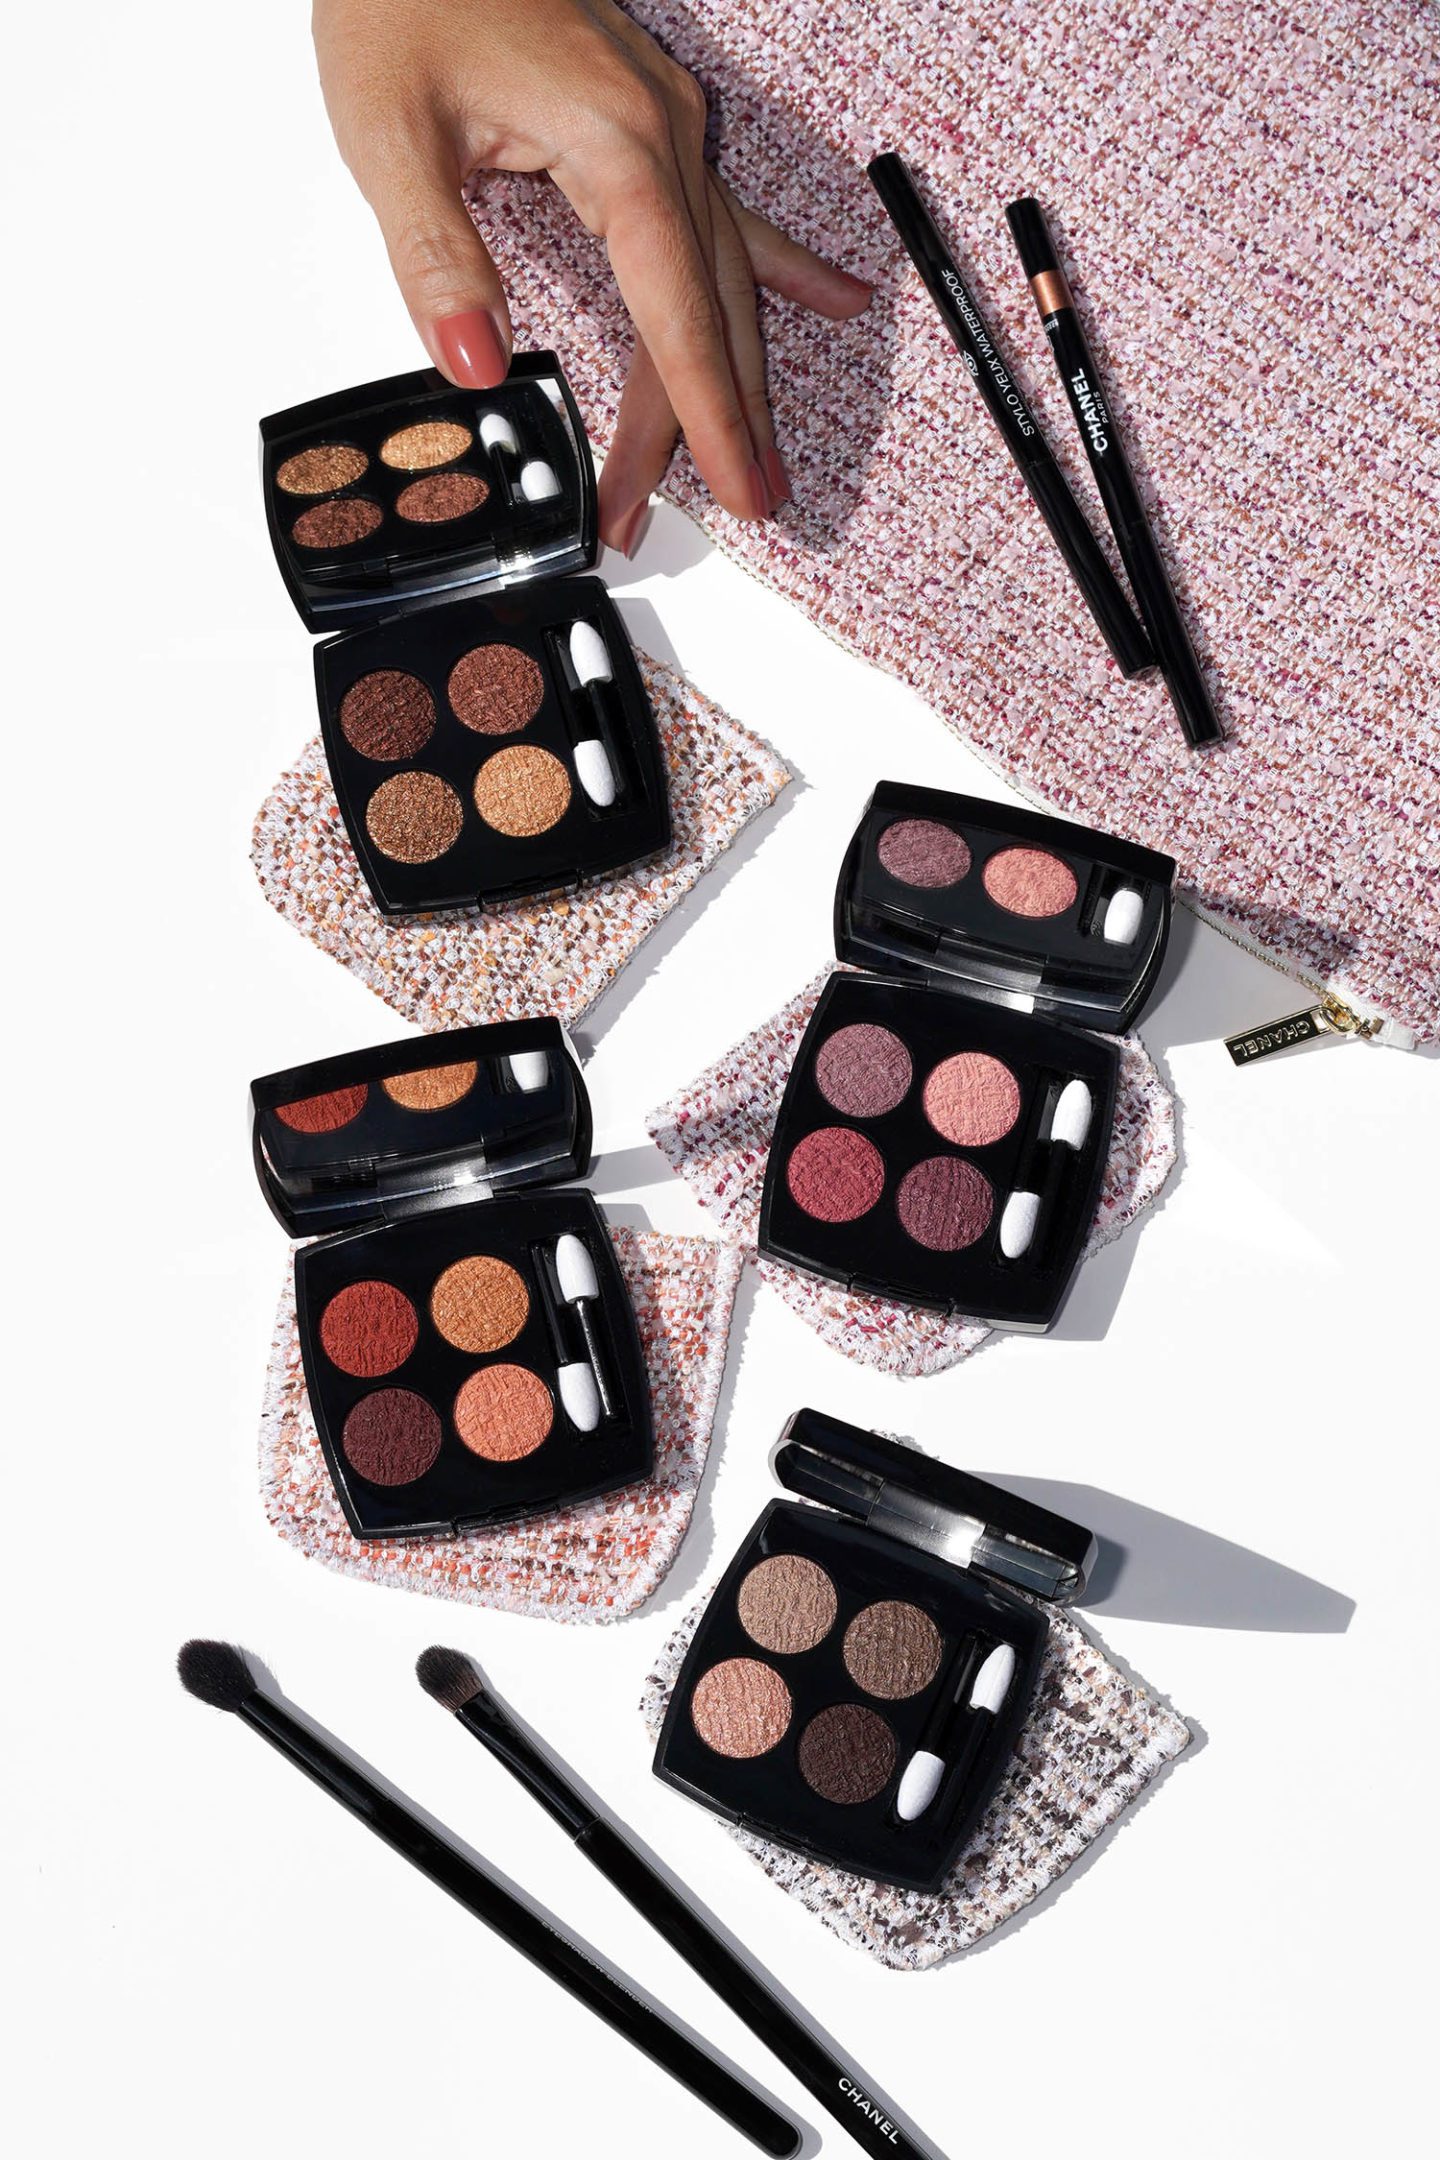 Chanel Fall Winter 2021 Makeup Collection - The Beauty Look Book